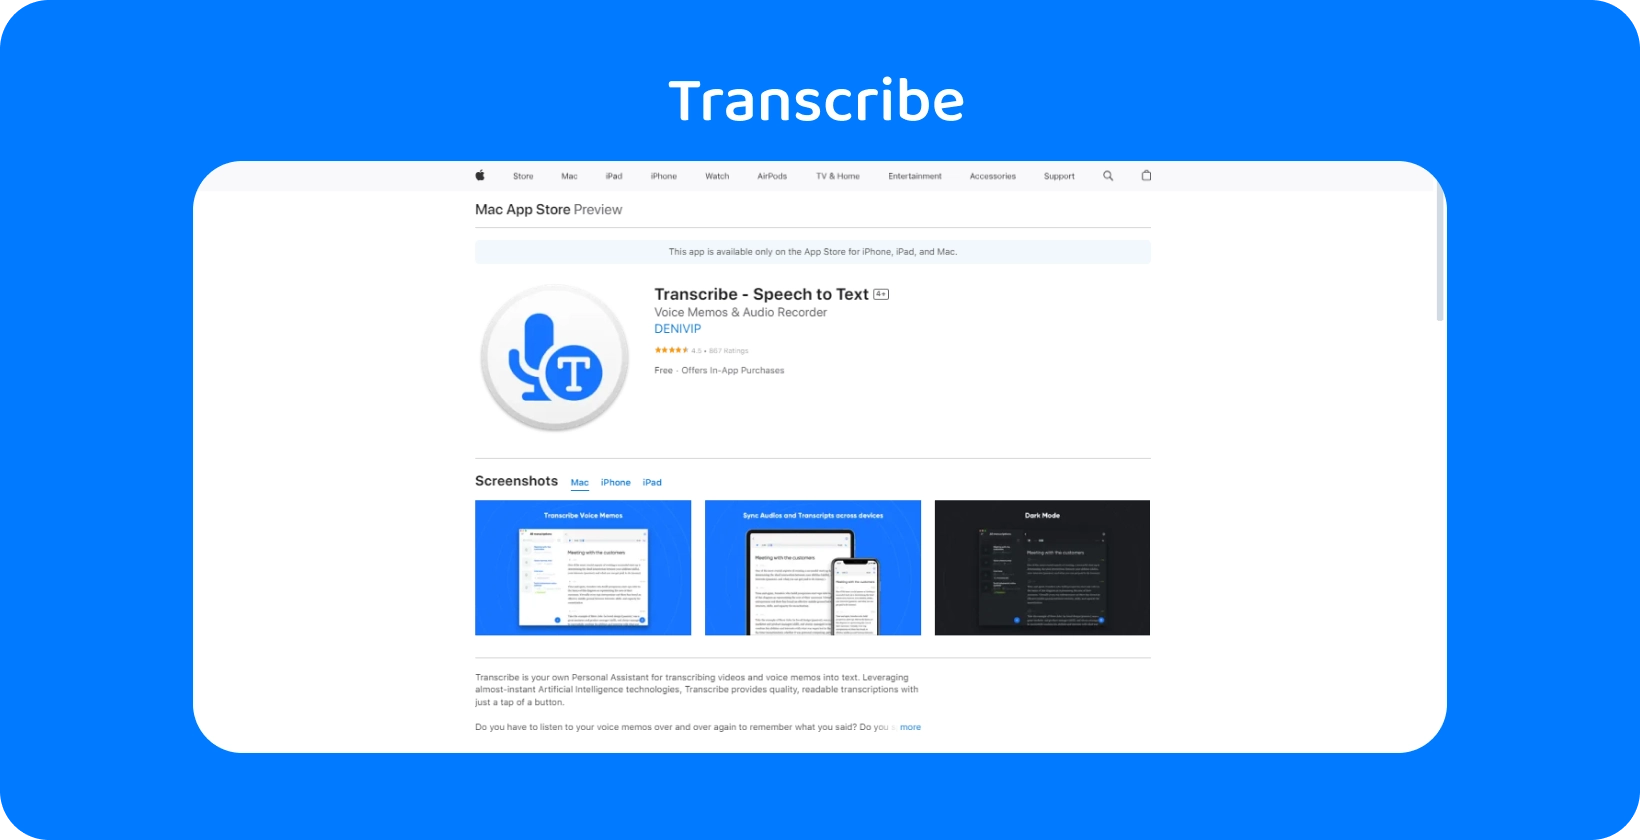 Screenshot of the Transcribe app on the Mac App Store, highlighting its speech-to-text capabilities.